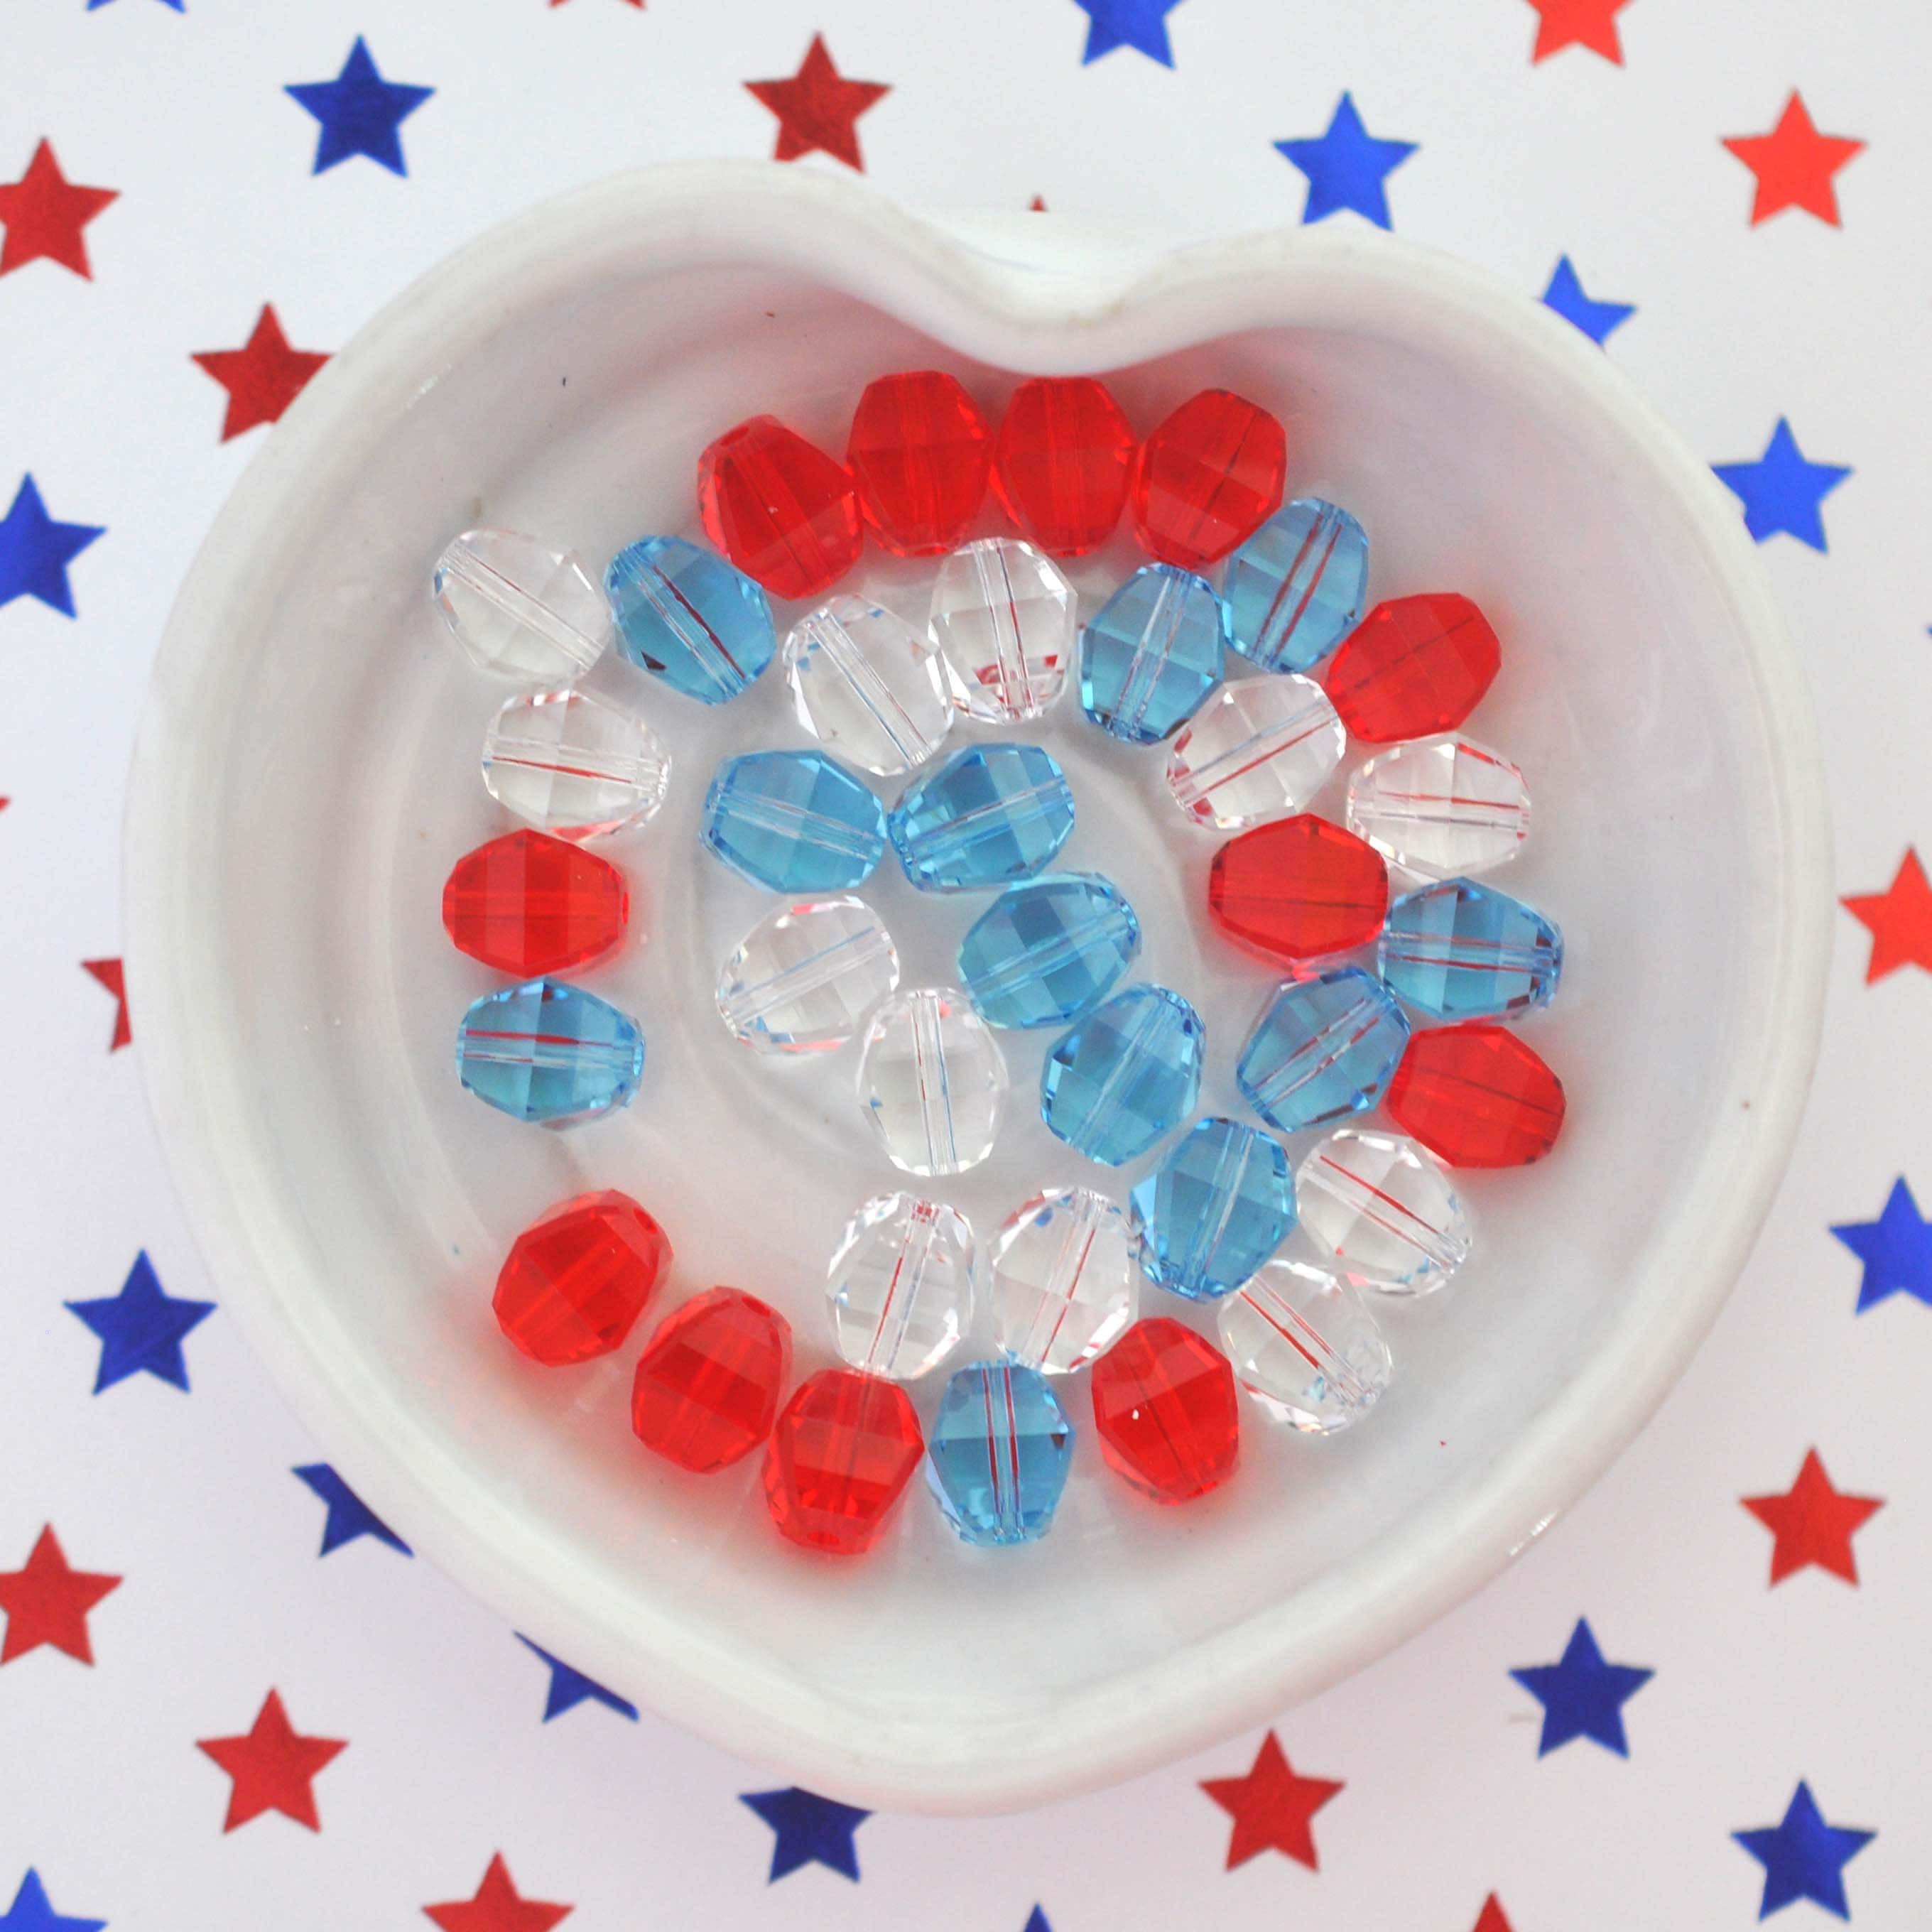 Stars, Stripes, and Sparkle Mix 8mm 5030 Barton Crystal - 18 Beads (6 of each color)